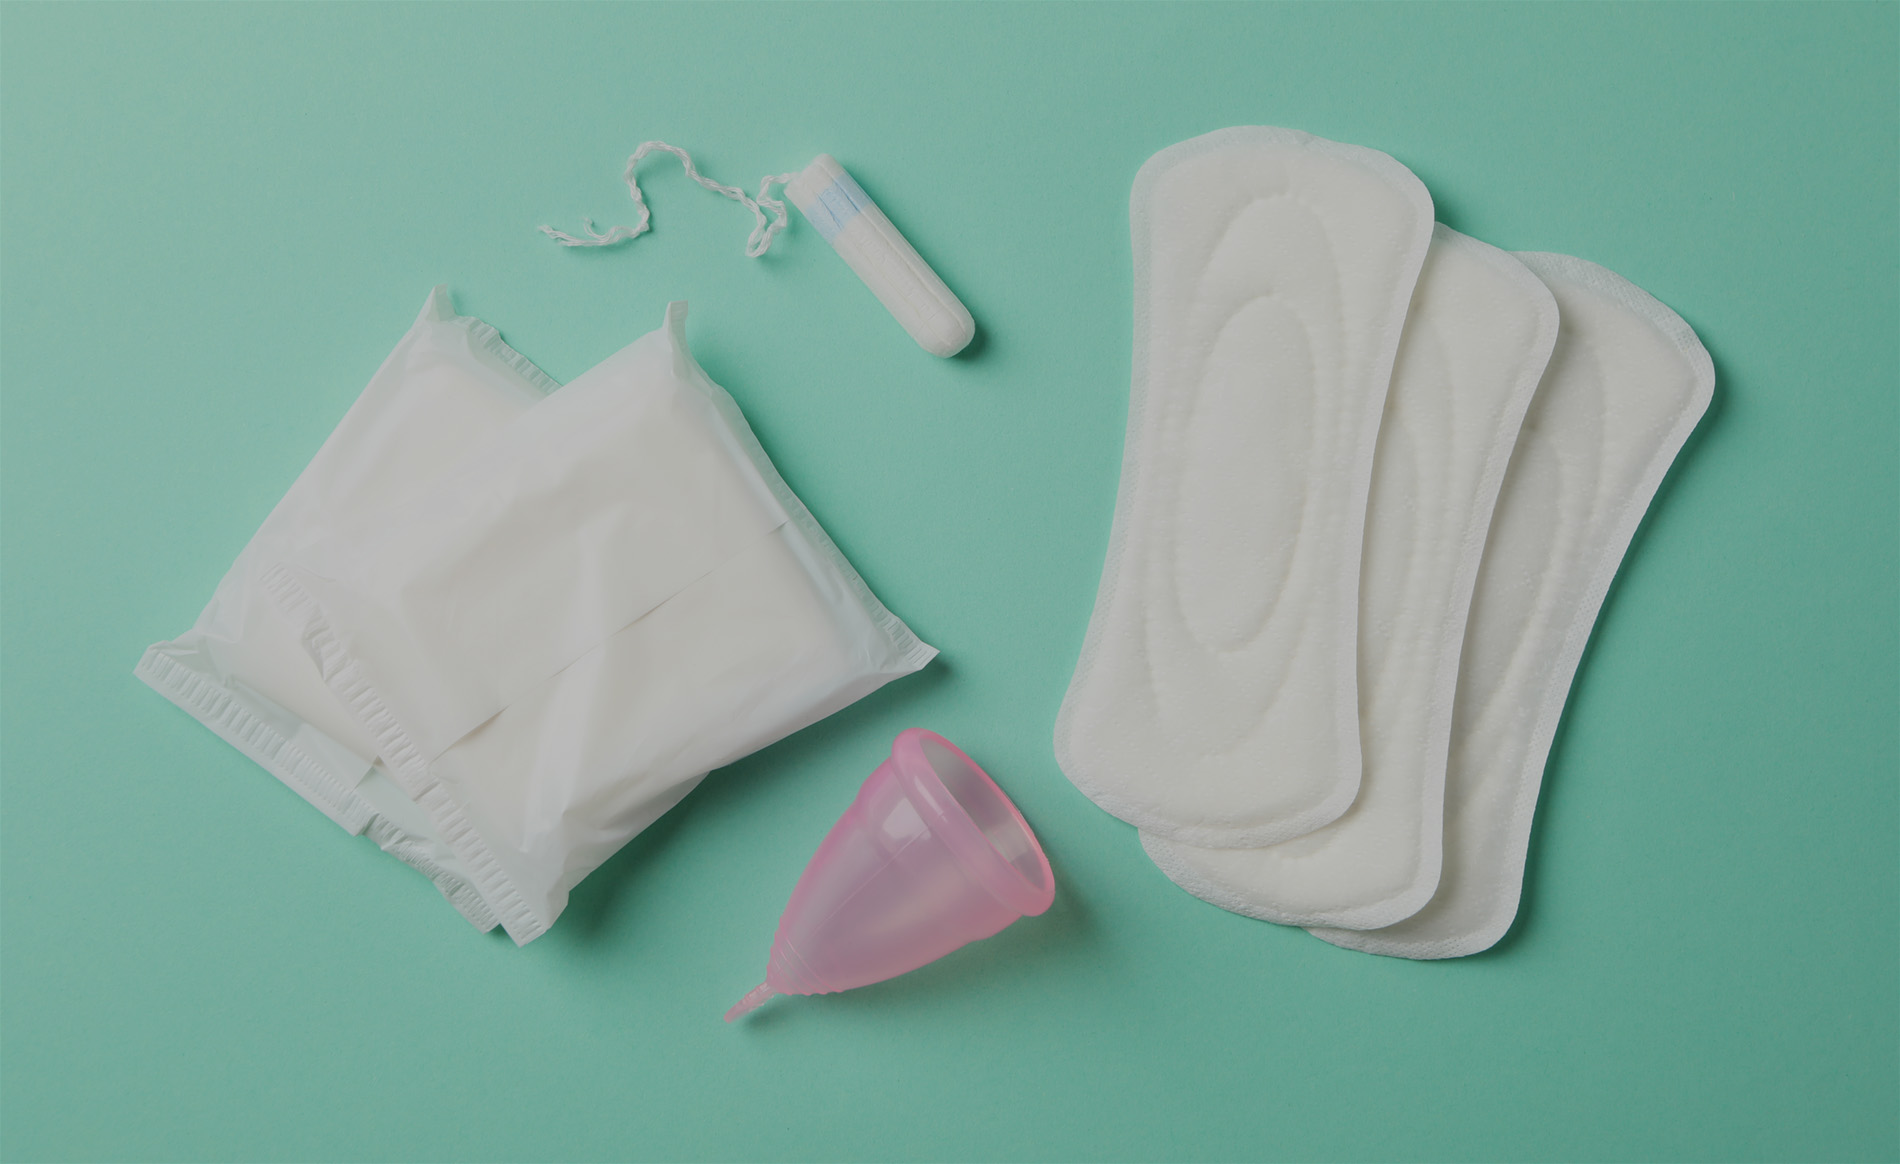 Picture of period products - pads, menstrual cups, tampons and liners